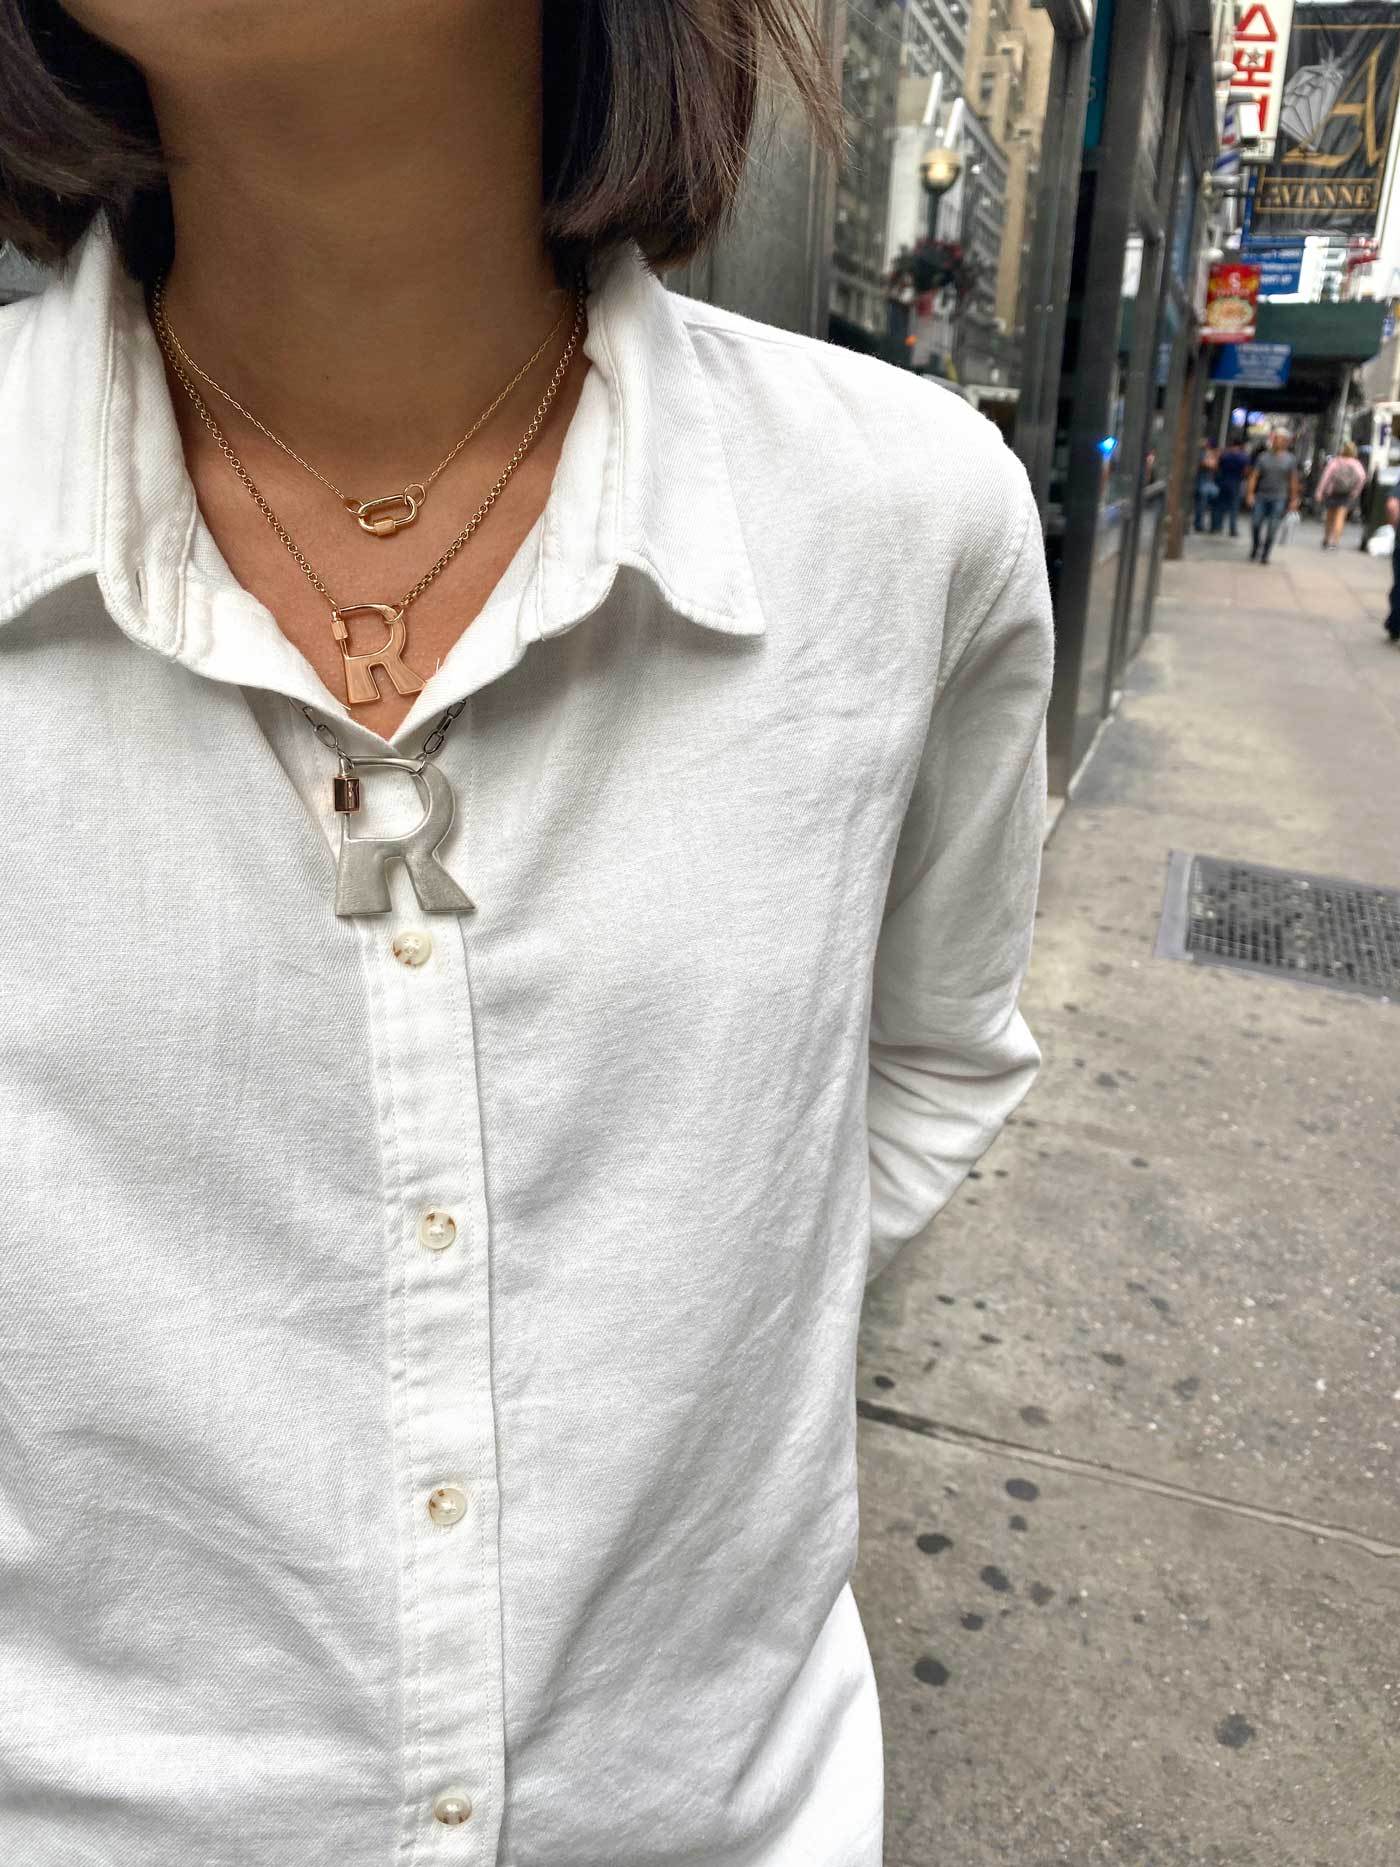 Close up of woman's decolletage wearing two necklaces with R locks